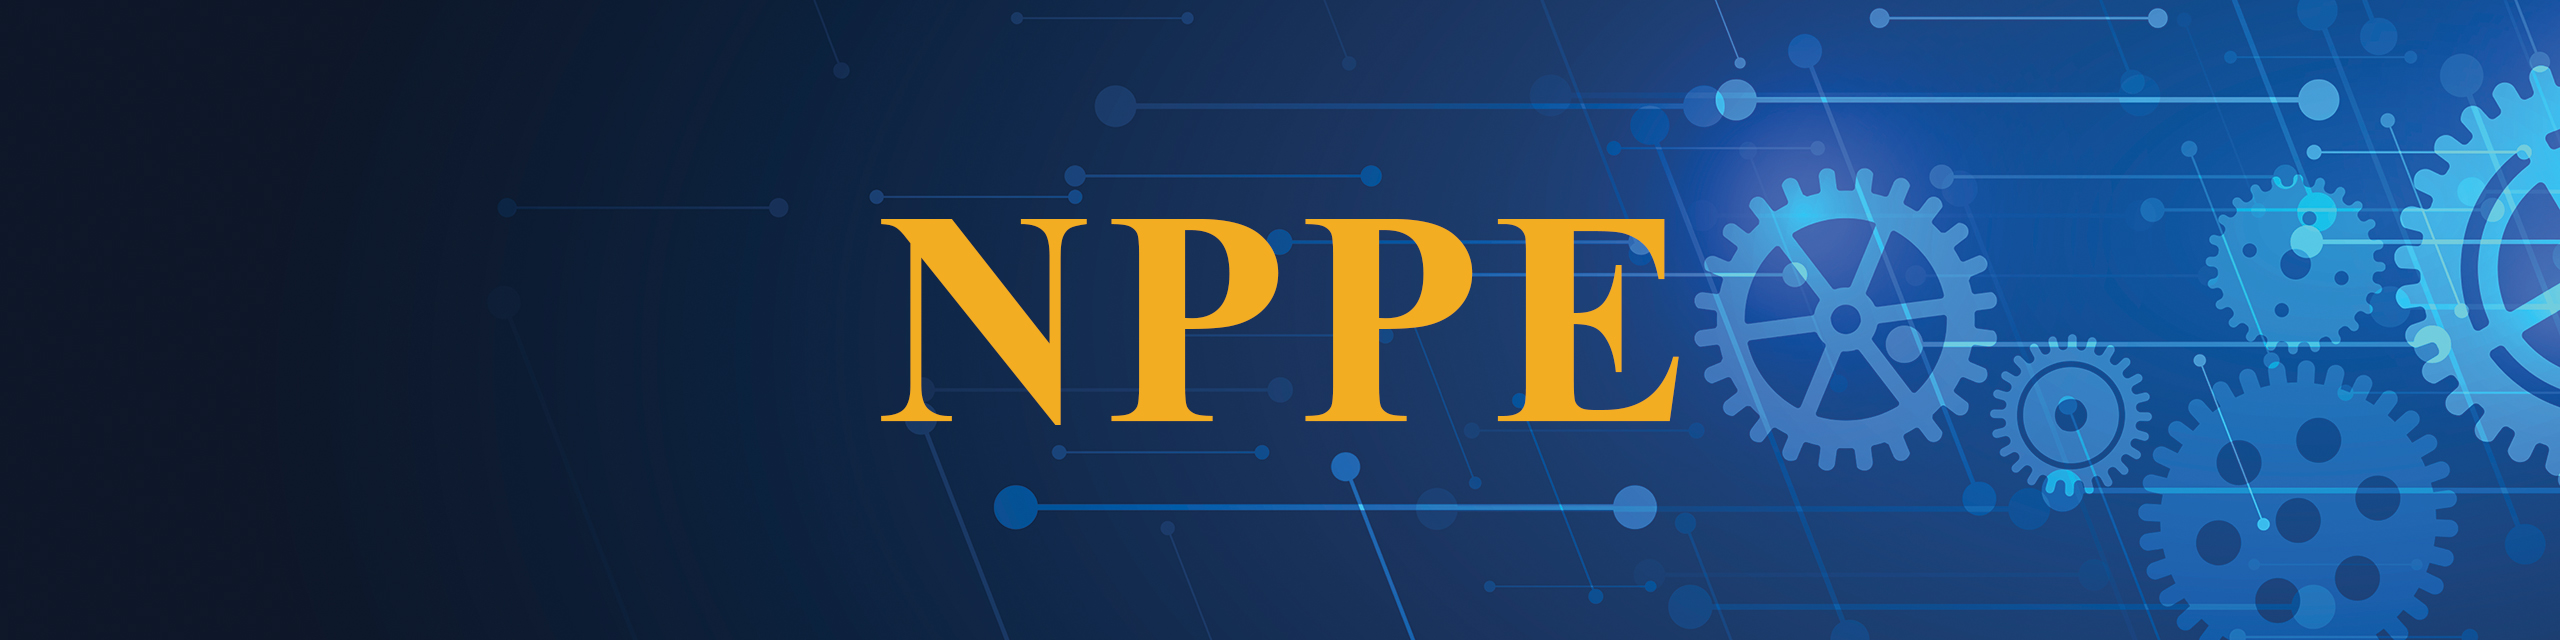 NPPE Exam - All you need to know!